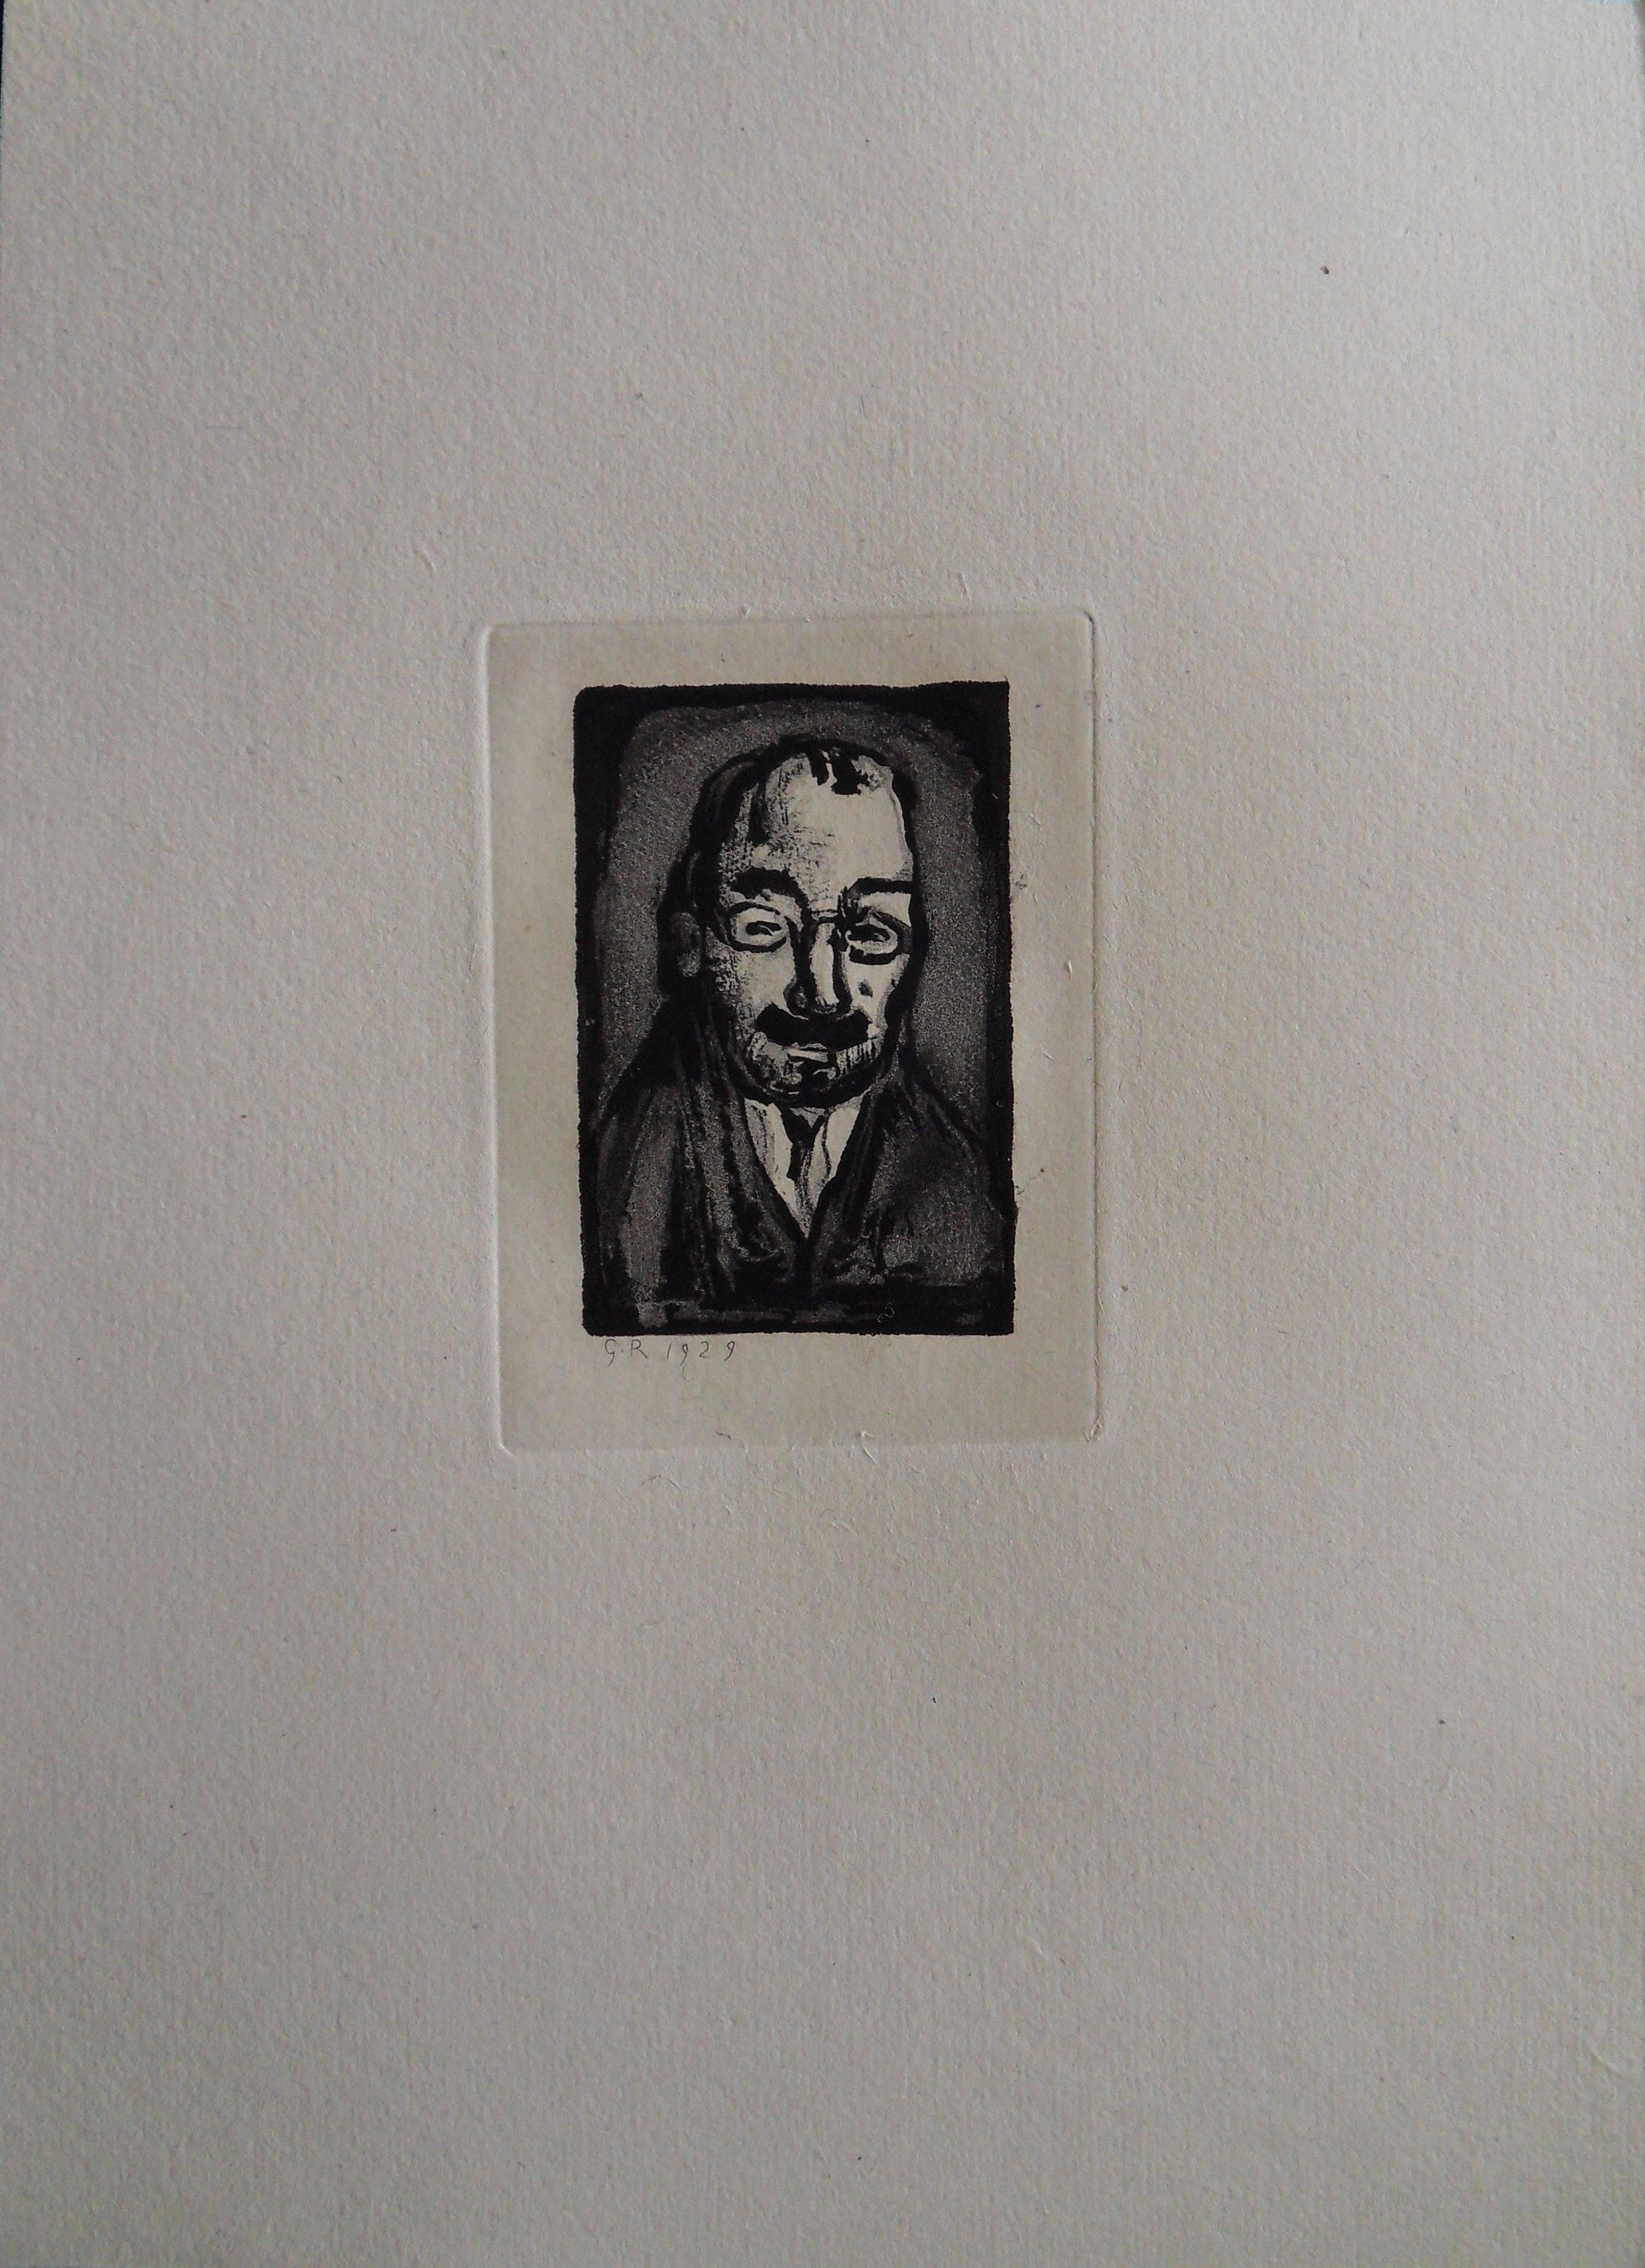 Man with Glasses - Original etching - 1929 - Realist Print by Georges Rouault